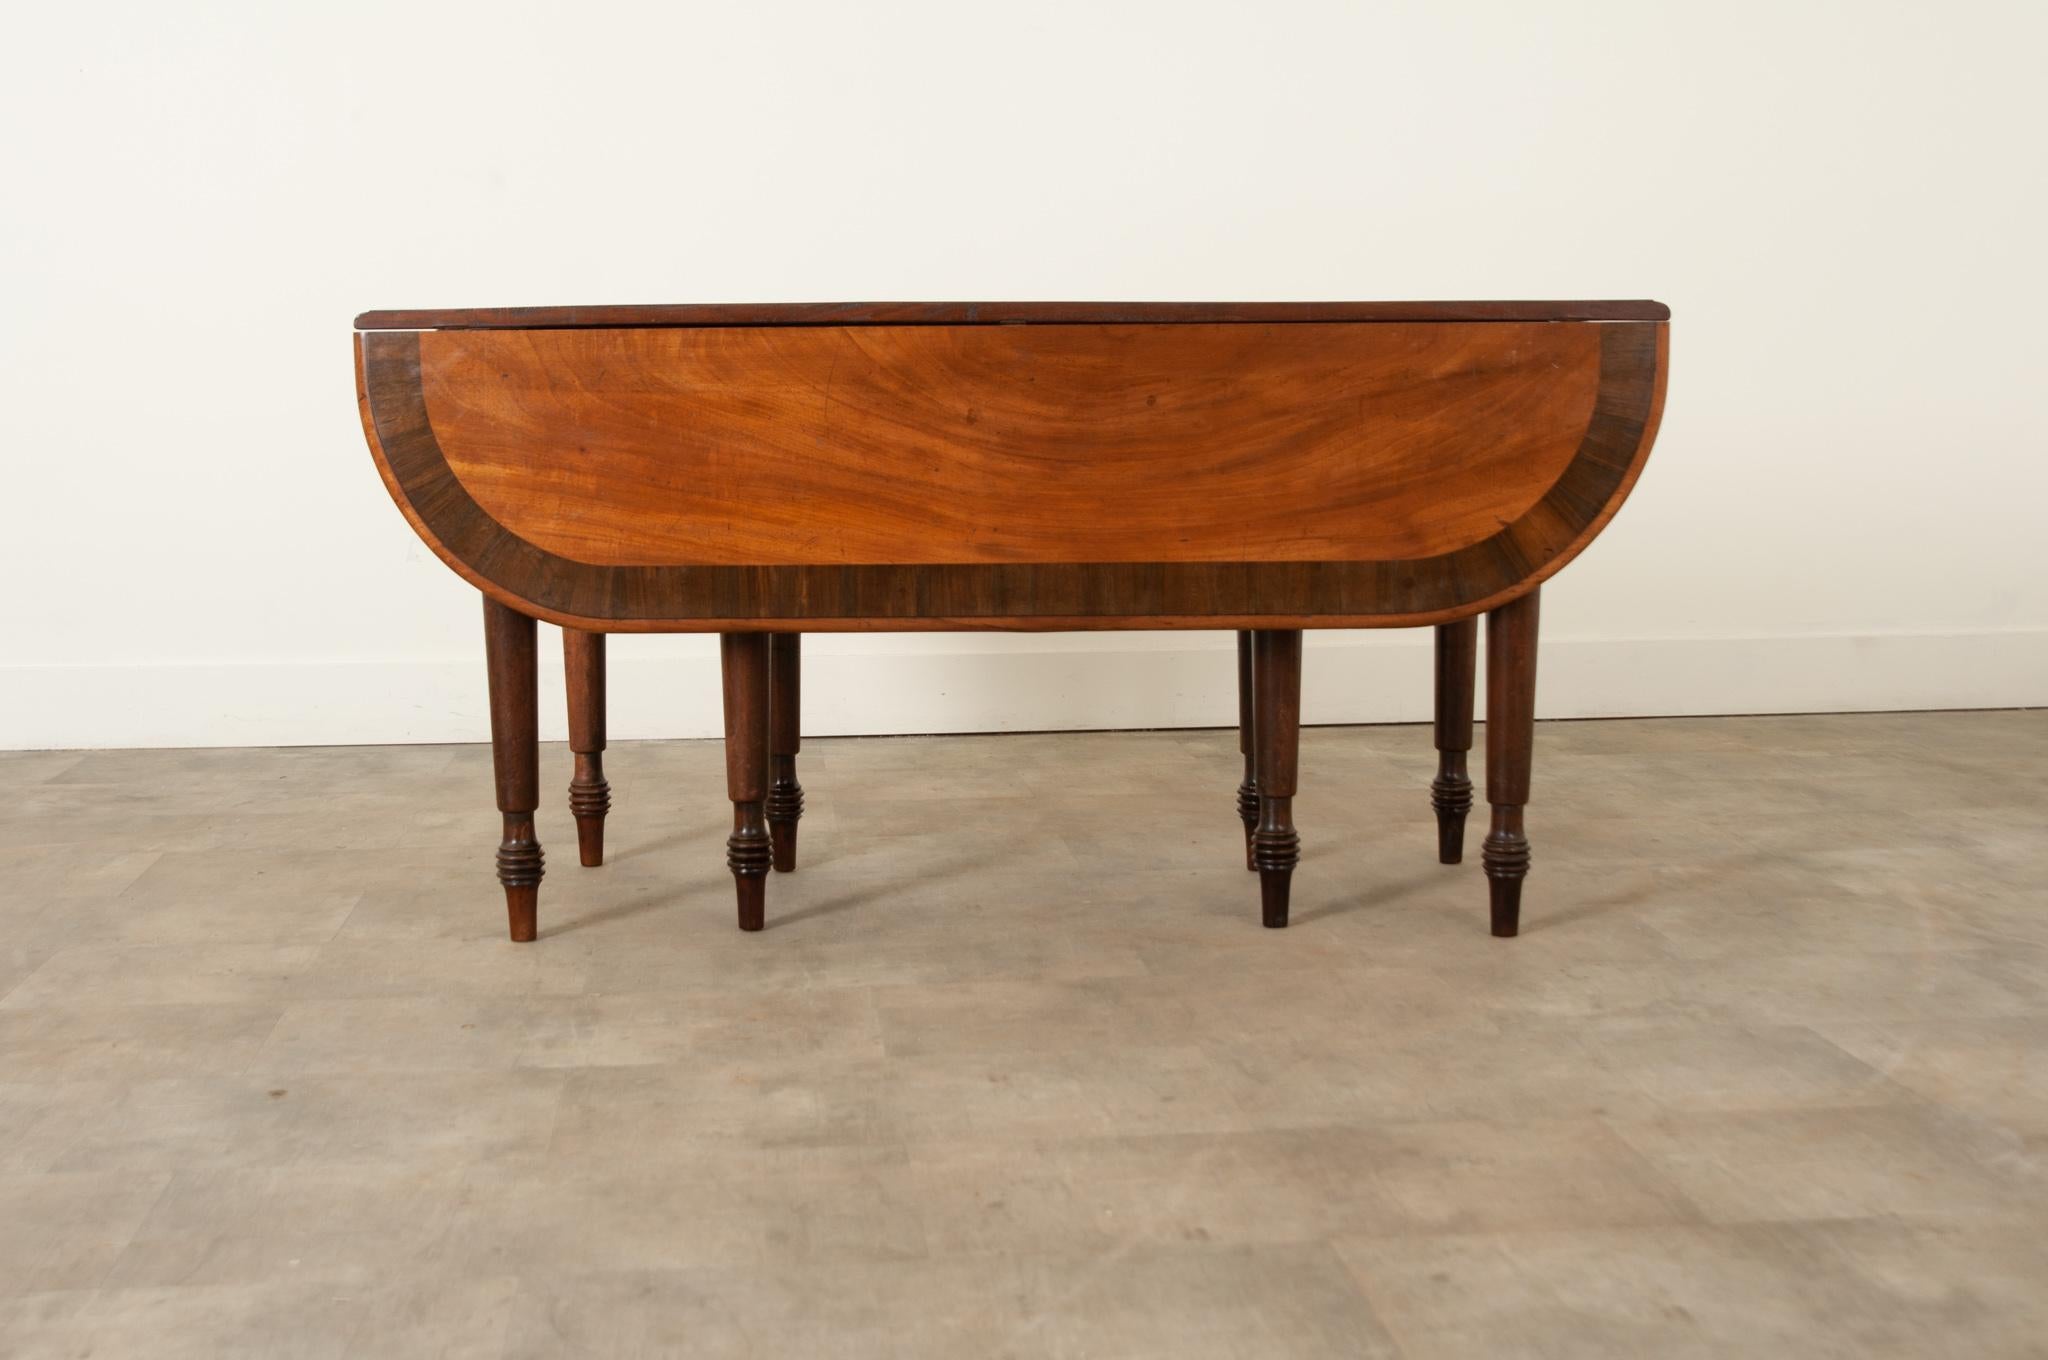 A stand-out English mahogany gateleg drop-leaf table, hand-crafted in England in the 19th Century. Attractive in color with well proportioned rounded corner drop leaves and a good folding mechanism. The beautiful flame mahogany top is edged in a